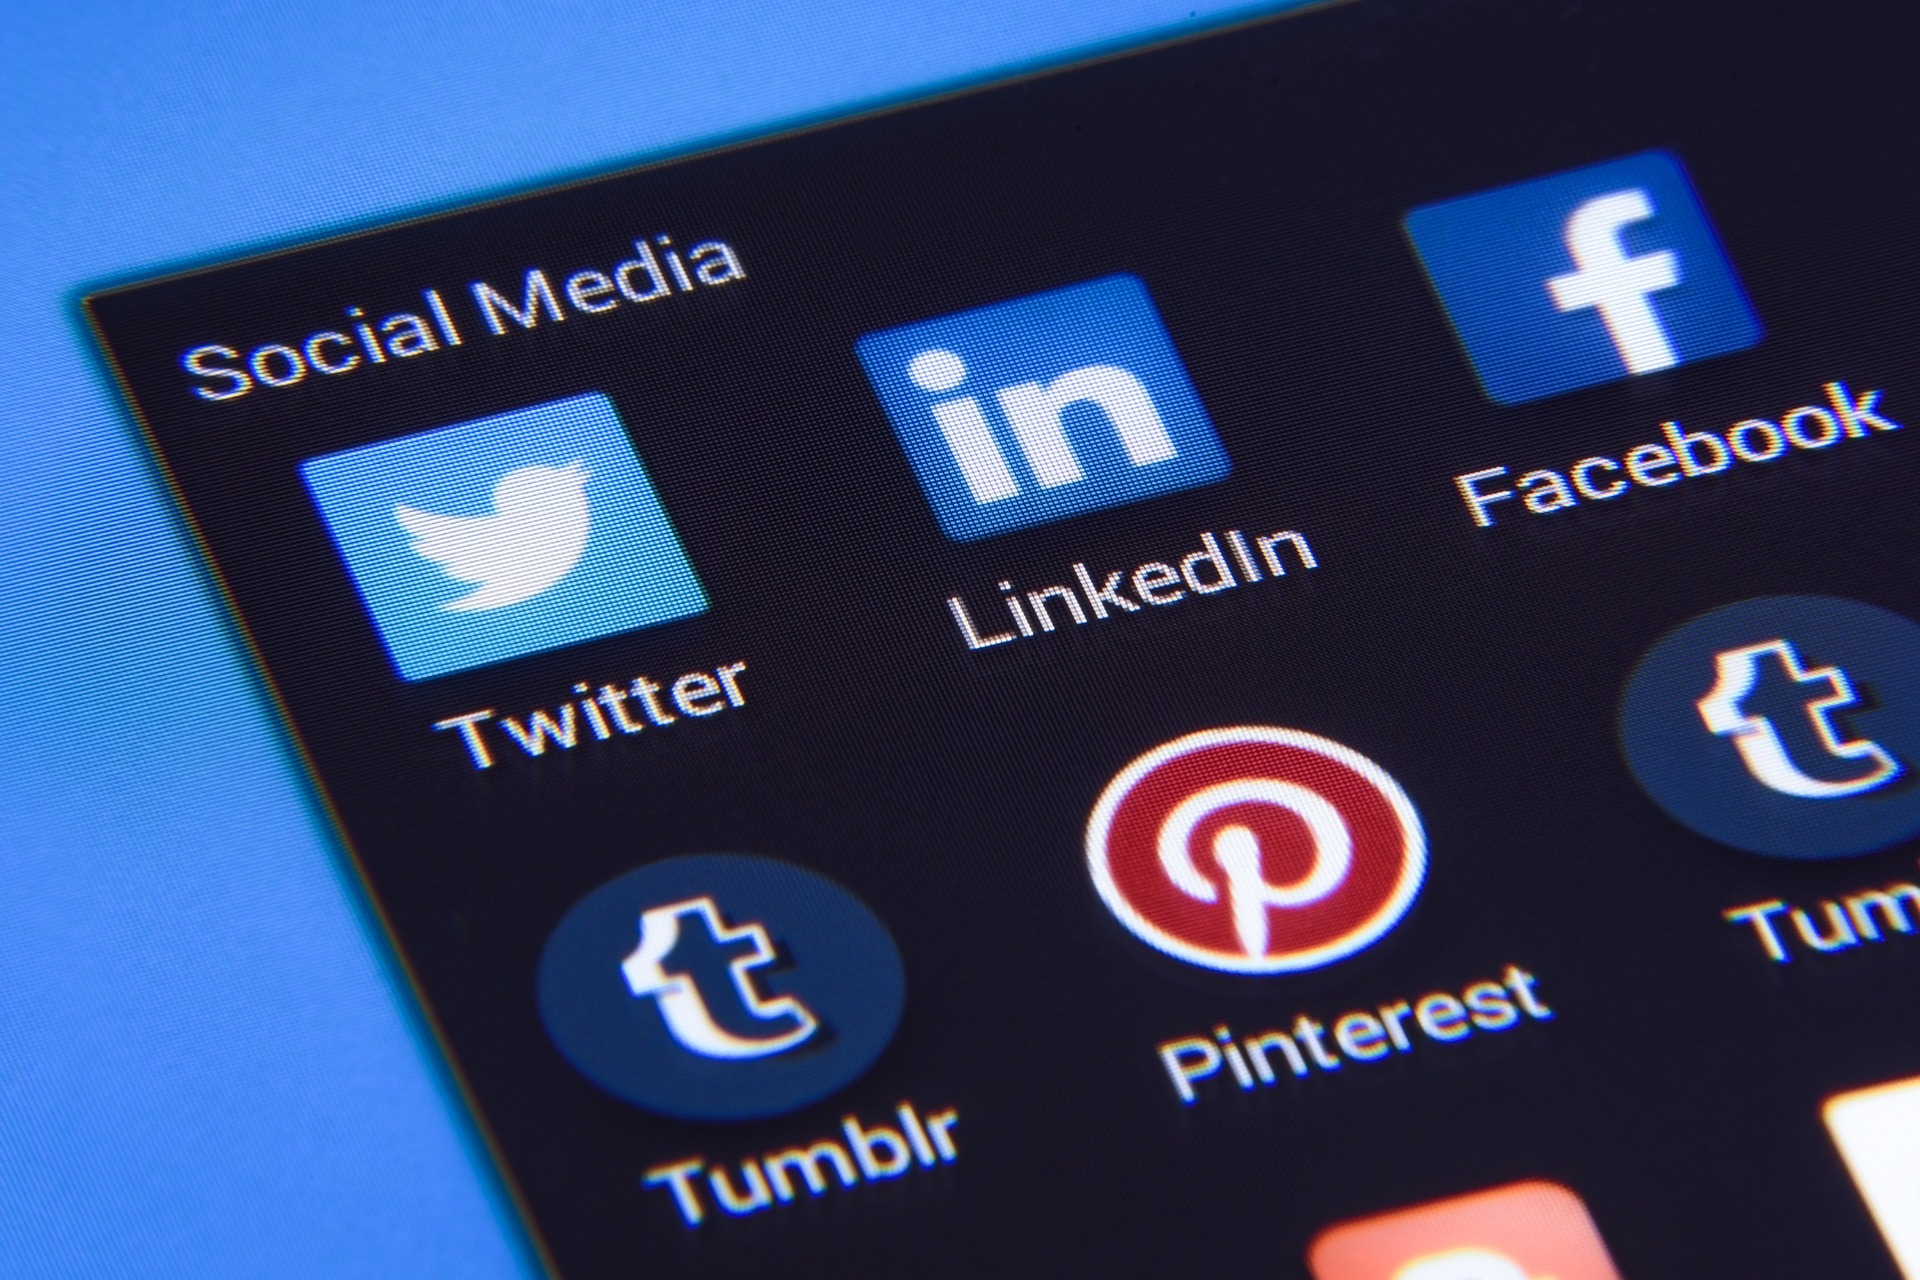 A phone screen displays a page of social media icons, including twitter, LinkedIn, Facebook, Tumblr and Pinterest